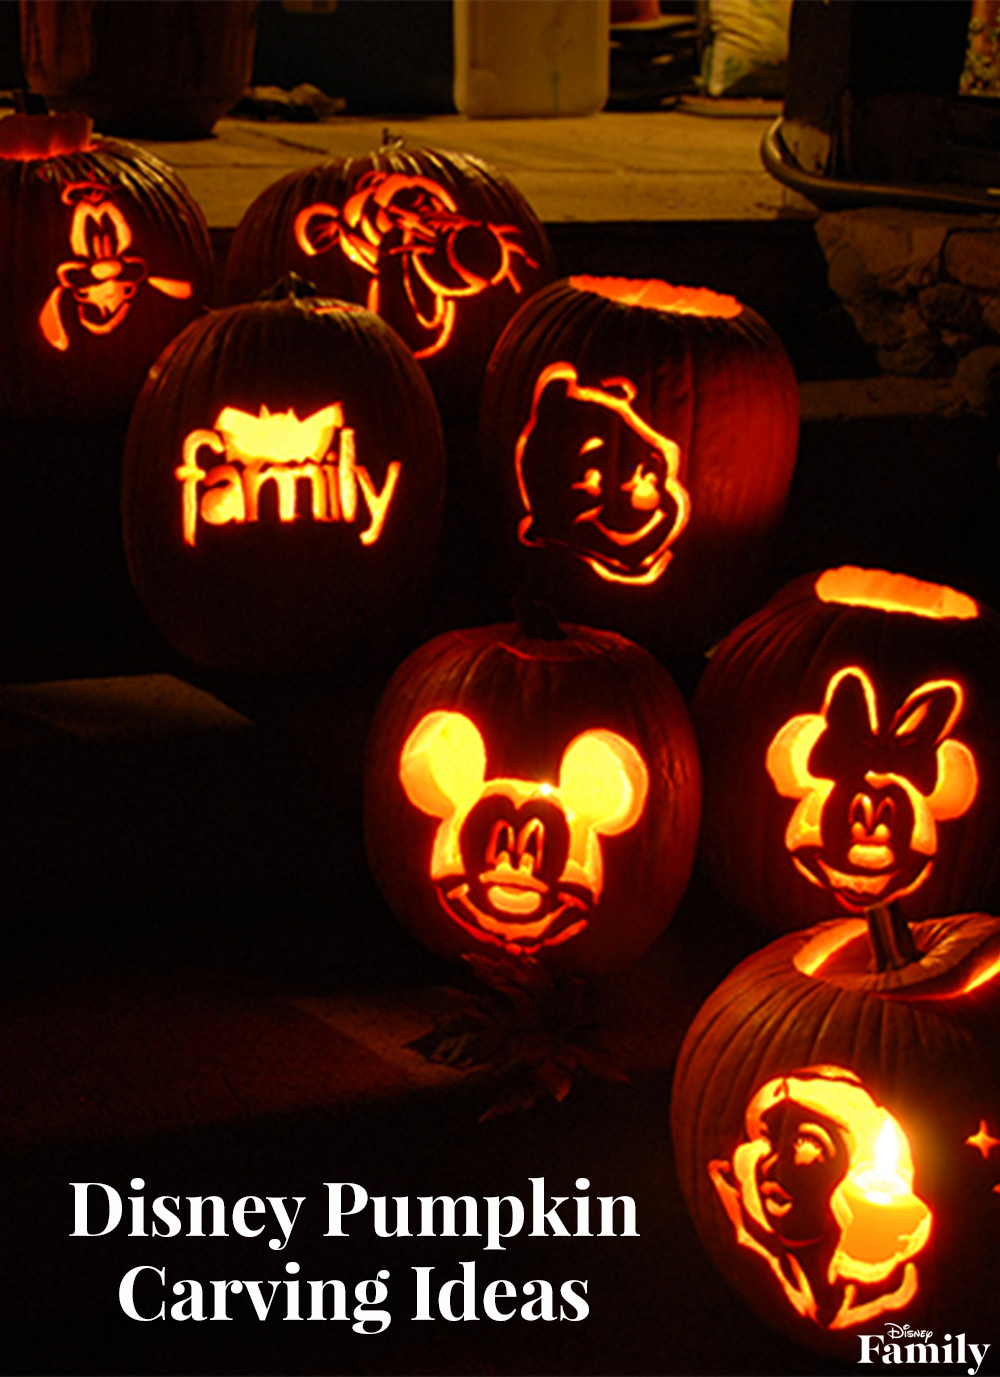 Easy Disney Pumpkin Carving Templates Ideas 2018 | Pumpkin Carving Ideas - Free Printable Toy Story Pumpkin Carving Patterns